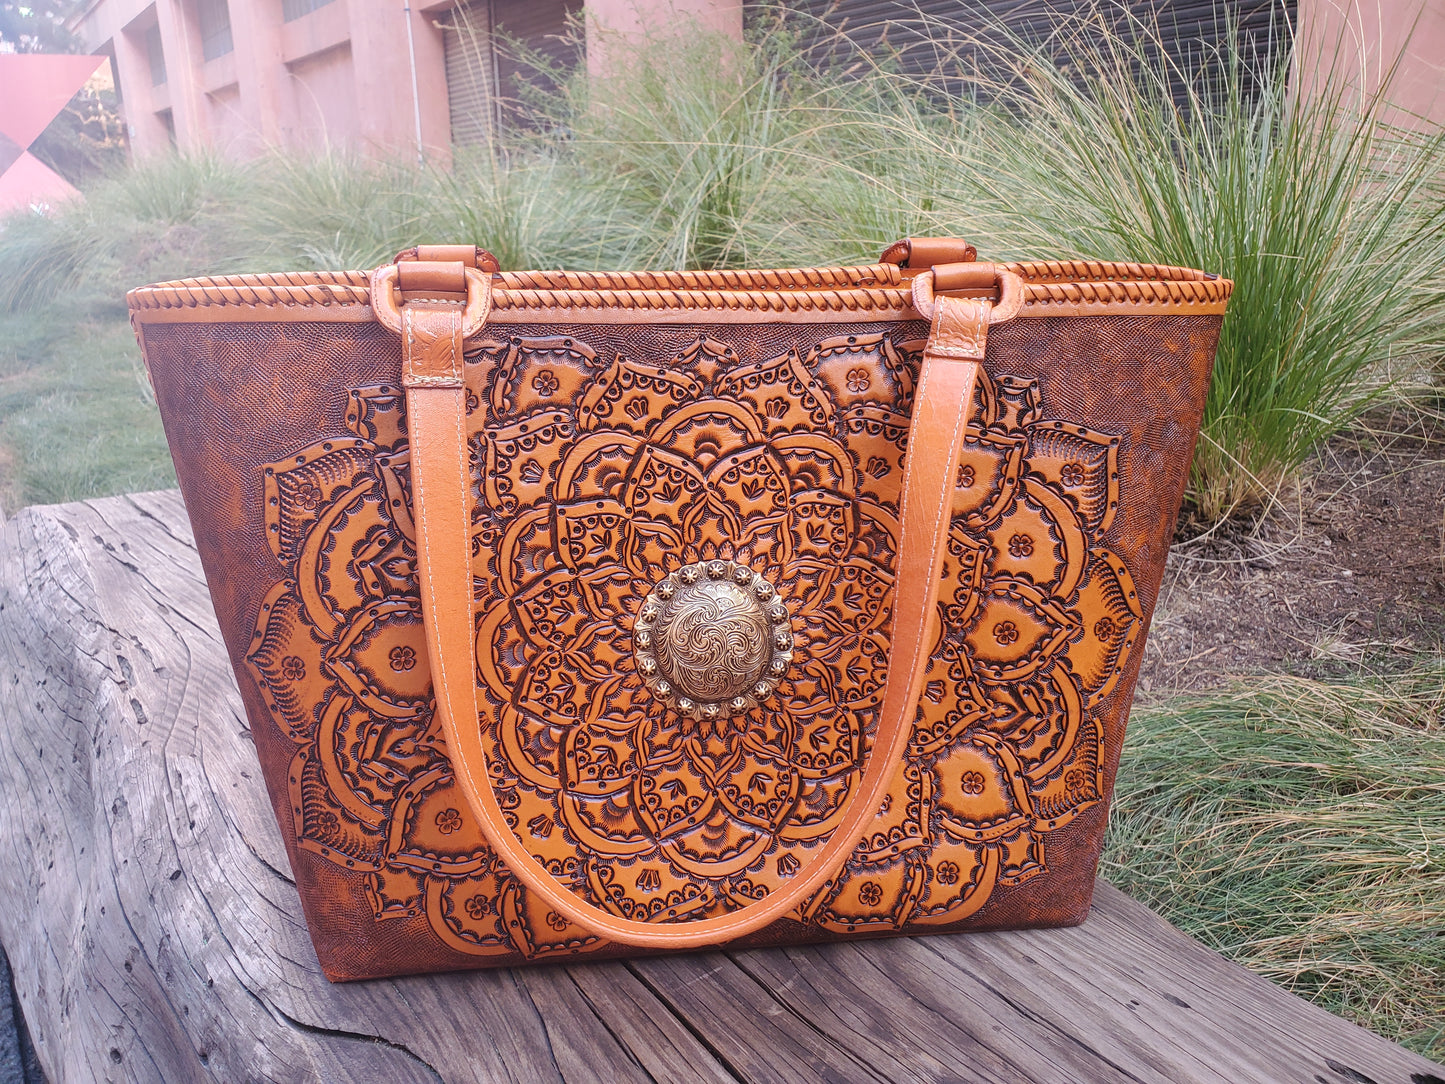 Hand Made Leather Tote Bag "MIA" by MIOHERMOSA Honey Mia Swirls Middle